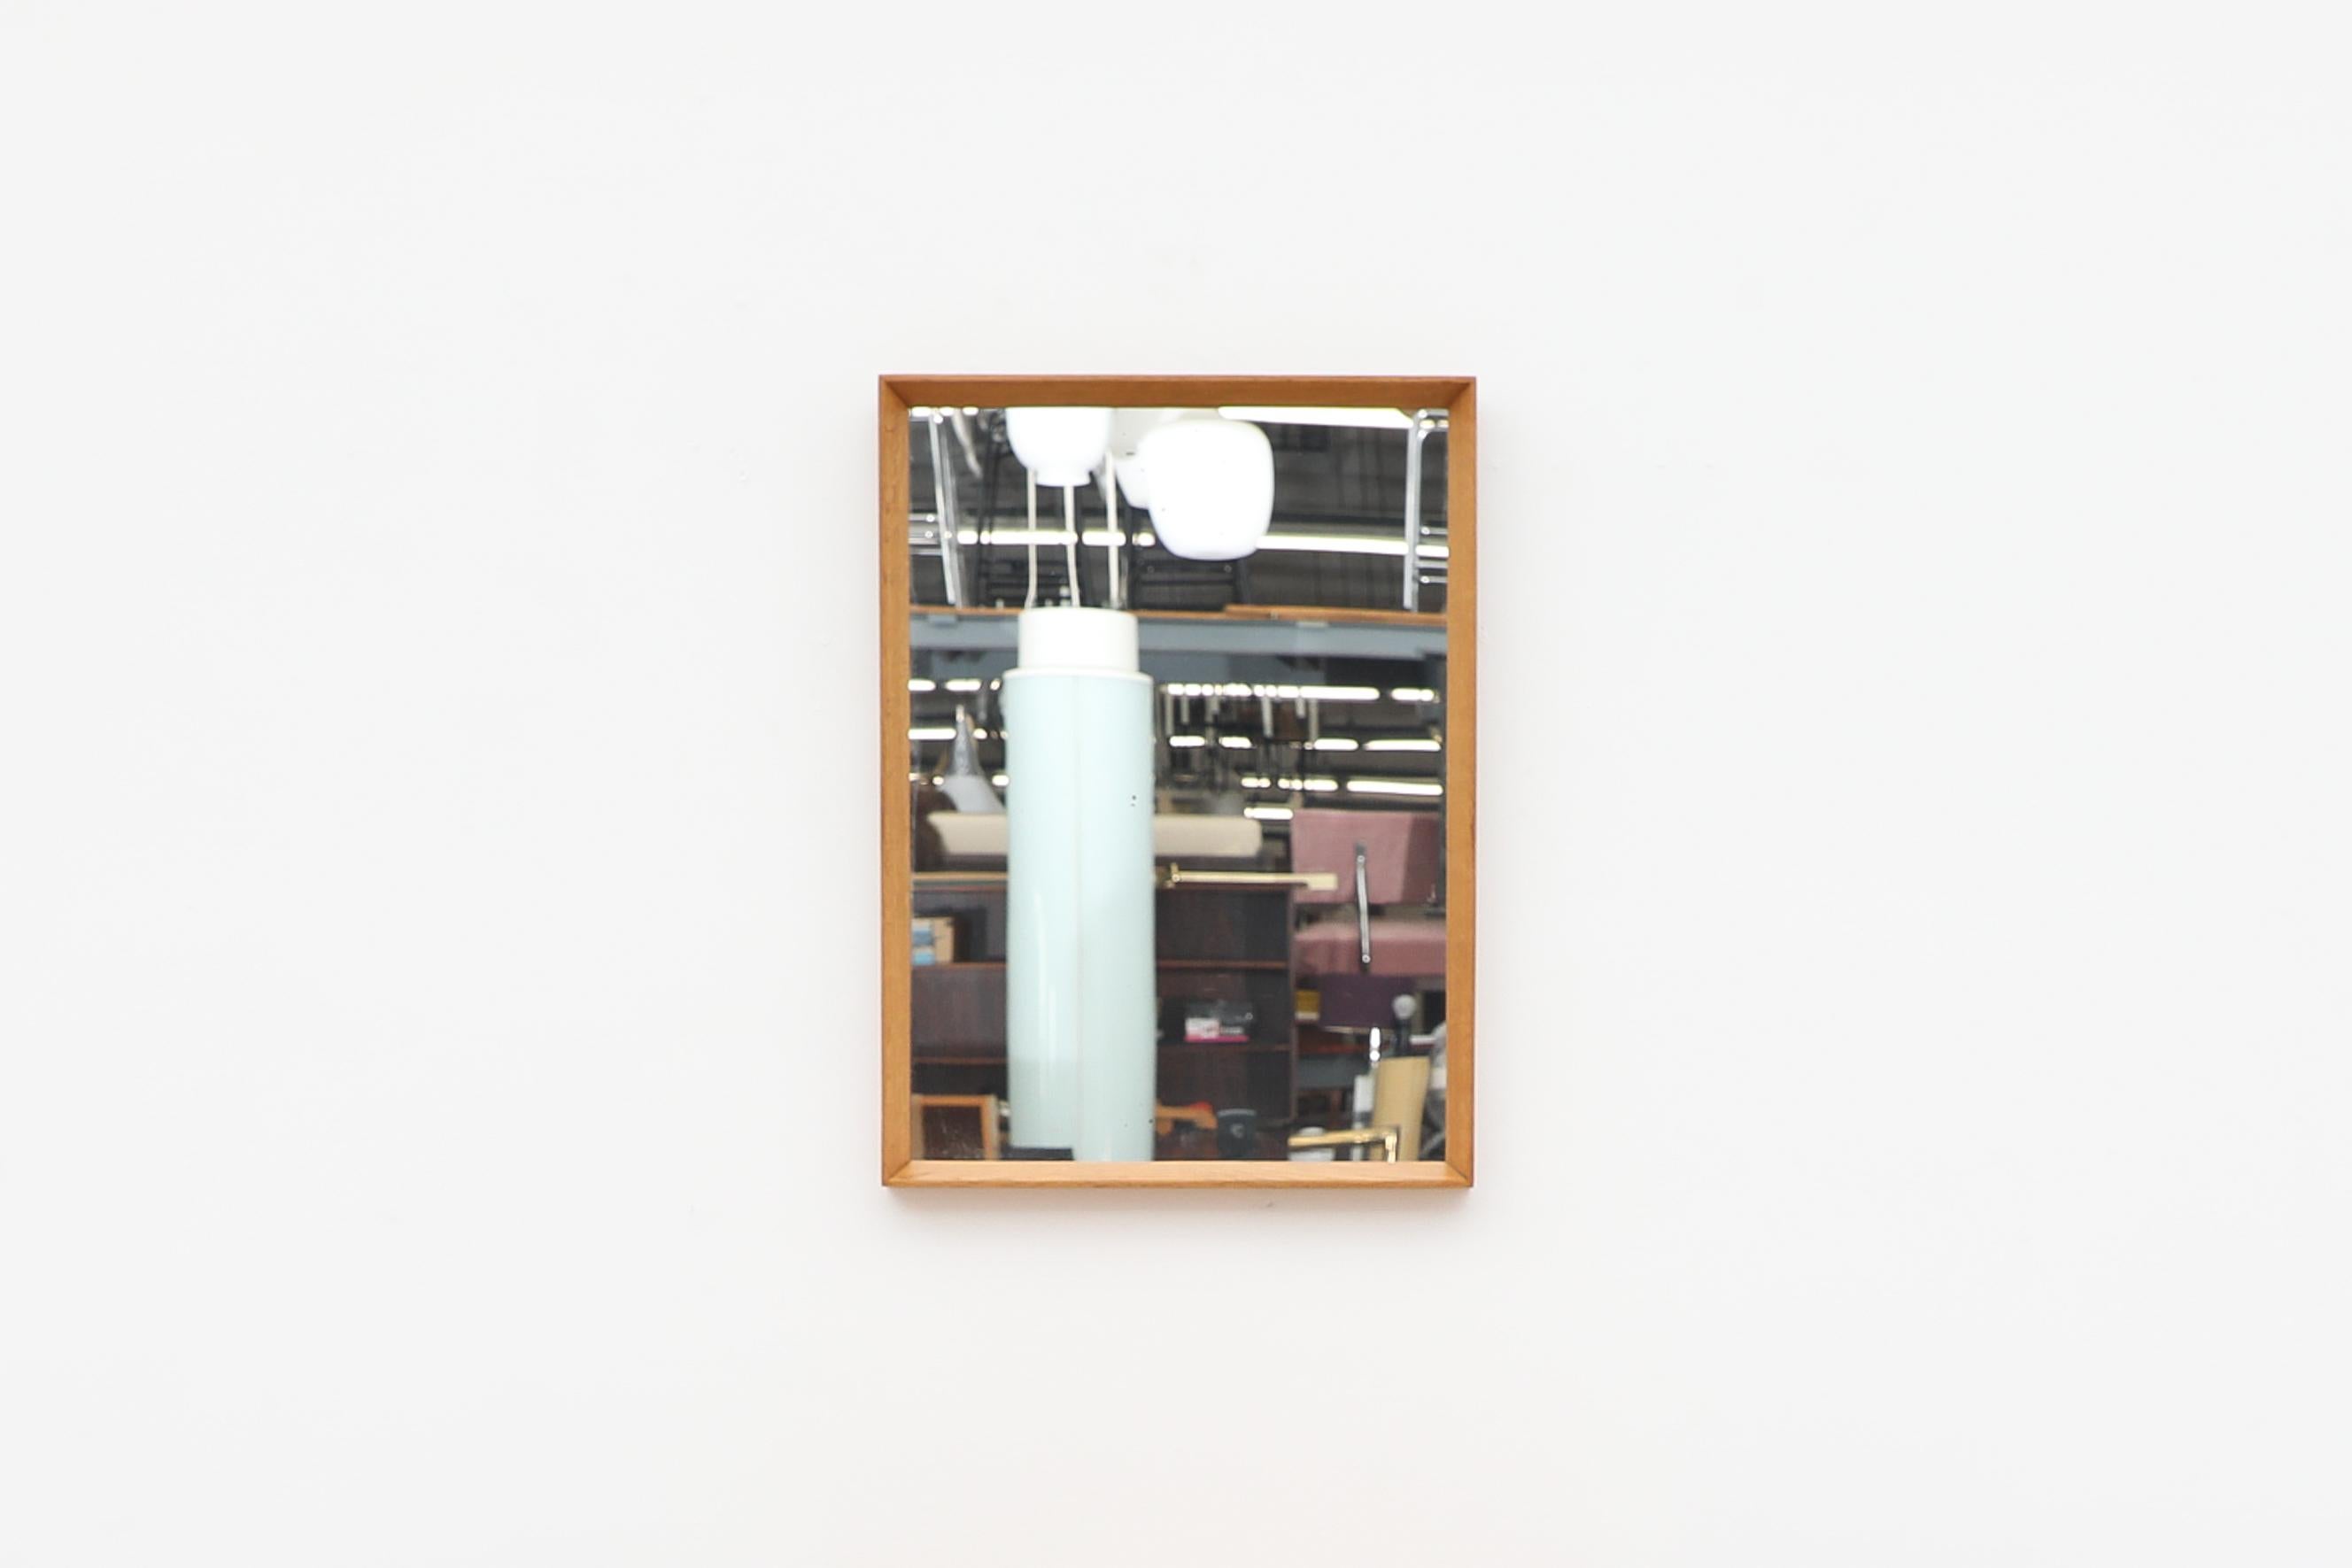 Danish Mid-Century Modern oak square mirror attributed to Aksel Kjersgaard. In original condition with visible wear and patina, consistent with its age and use.